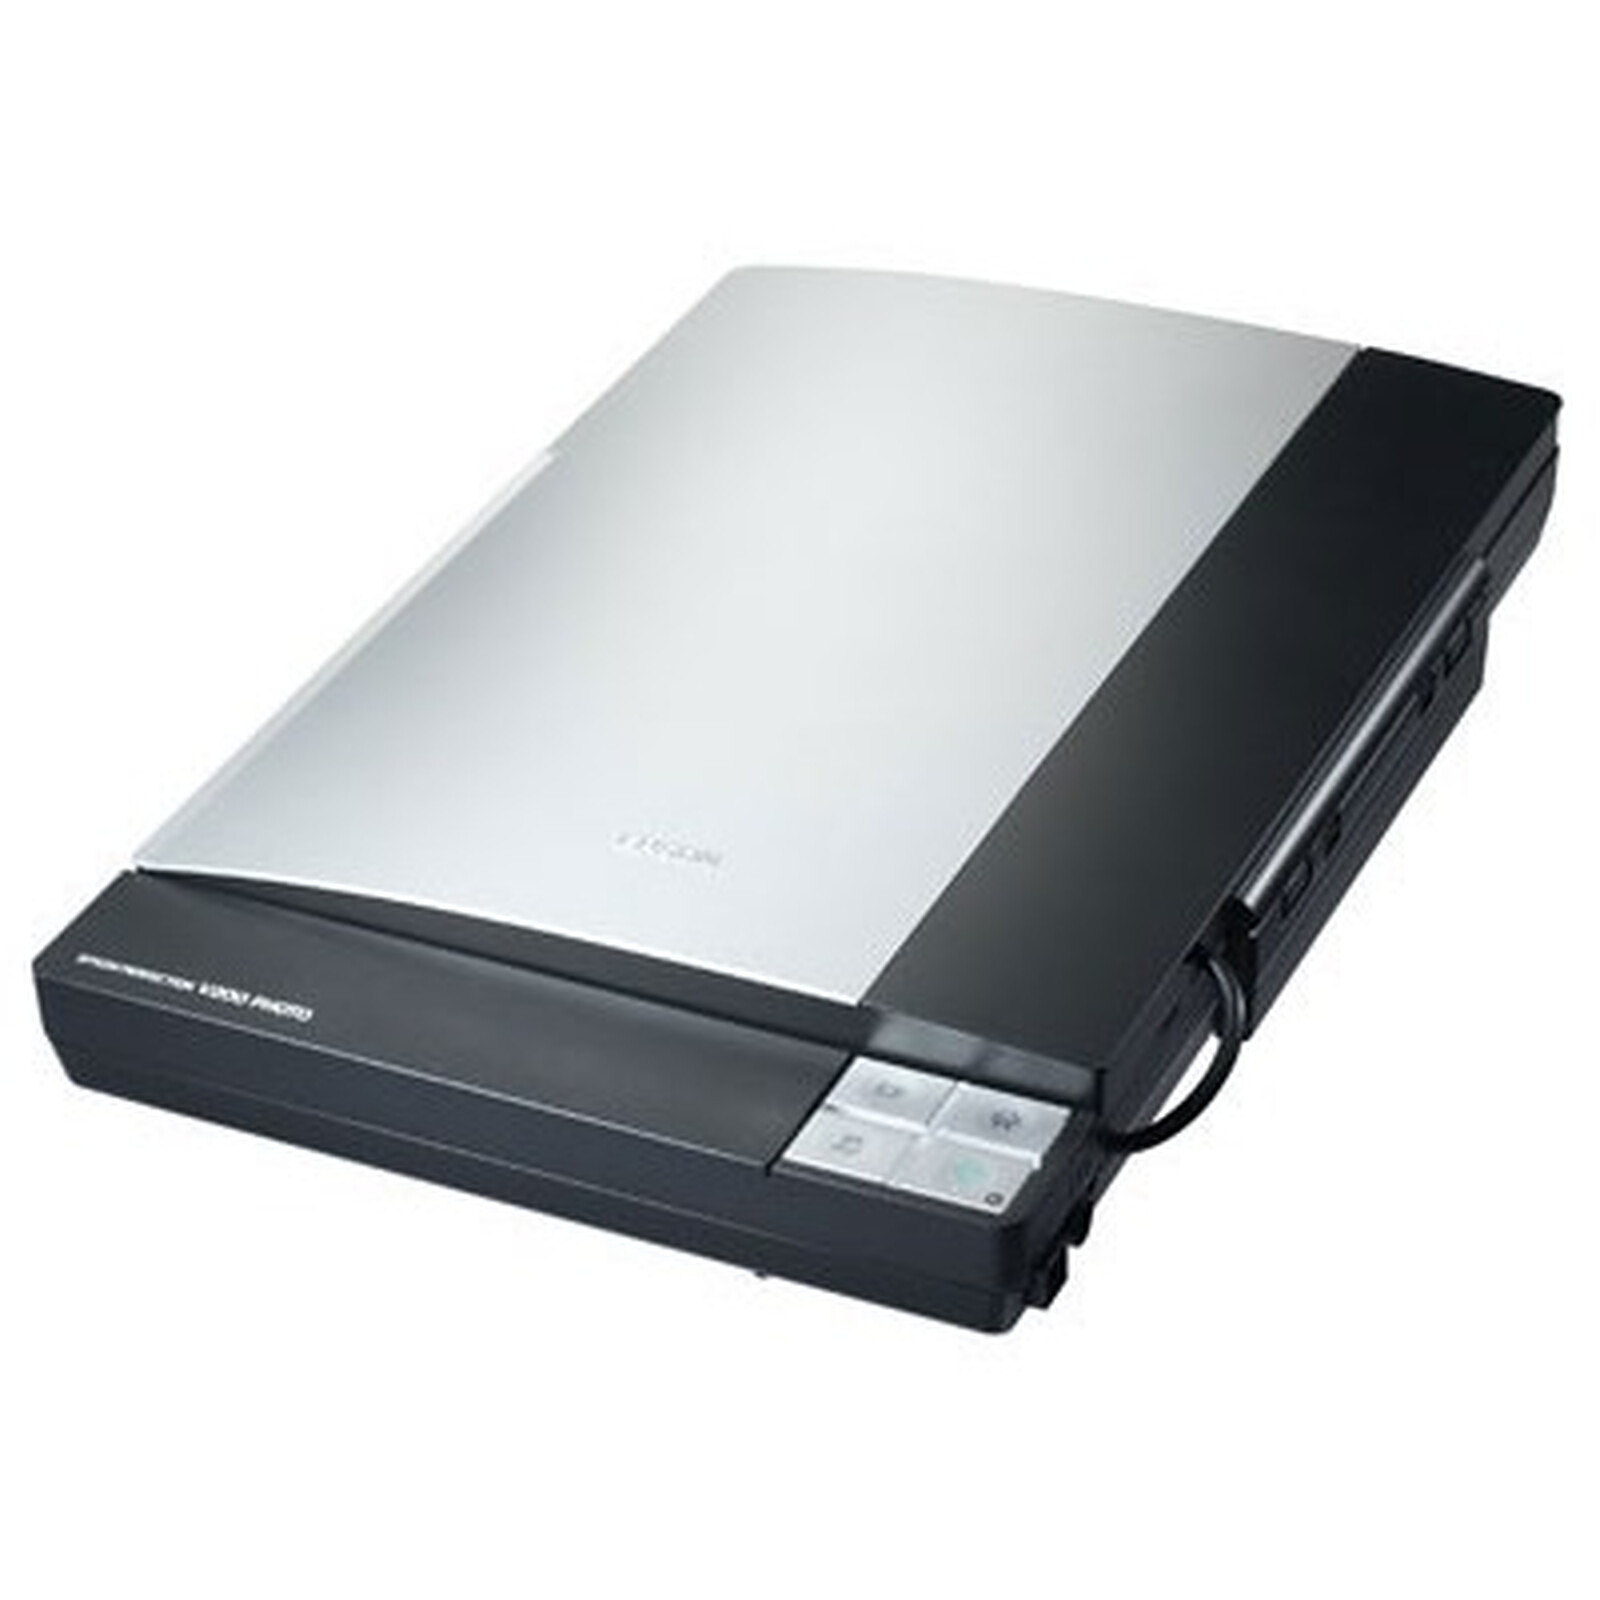 epson perfection 2400 photo driver linux